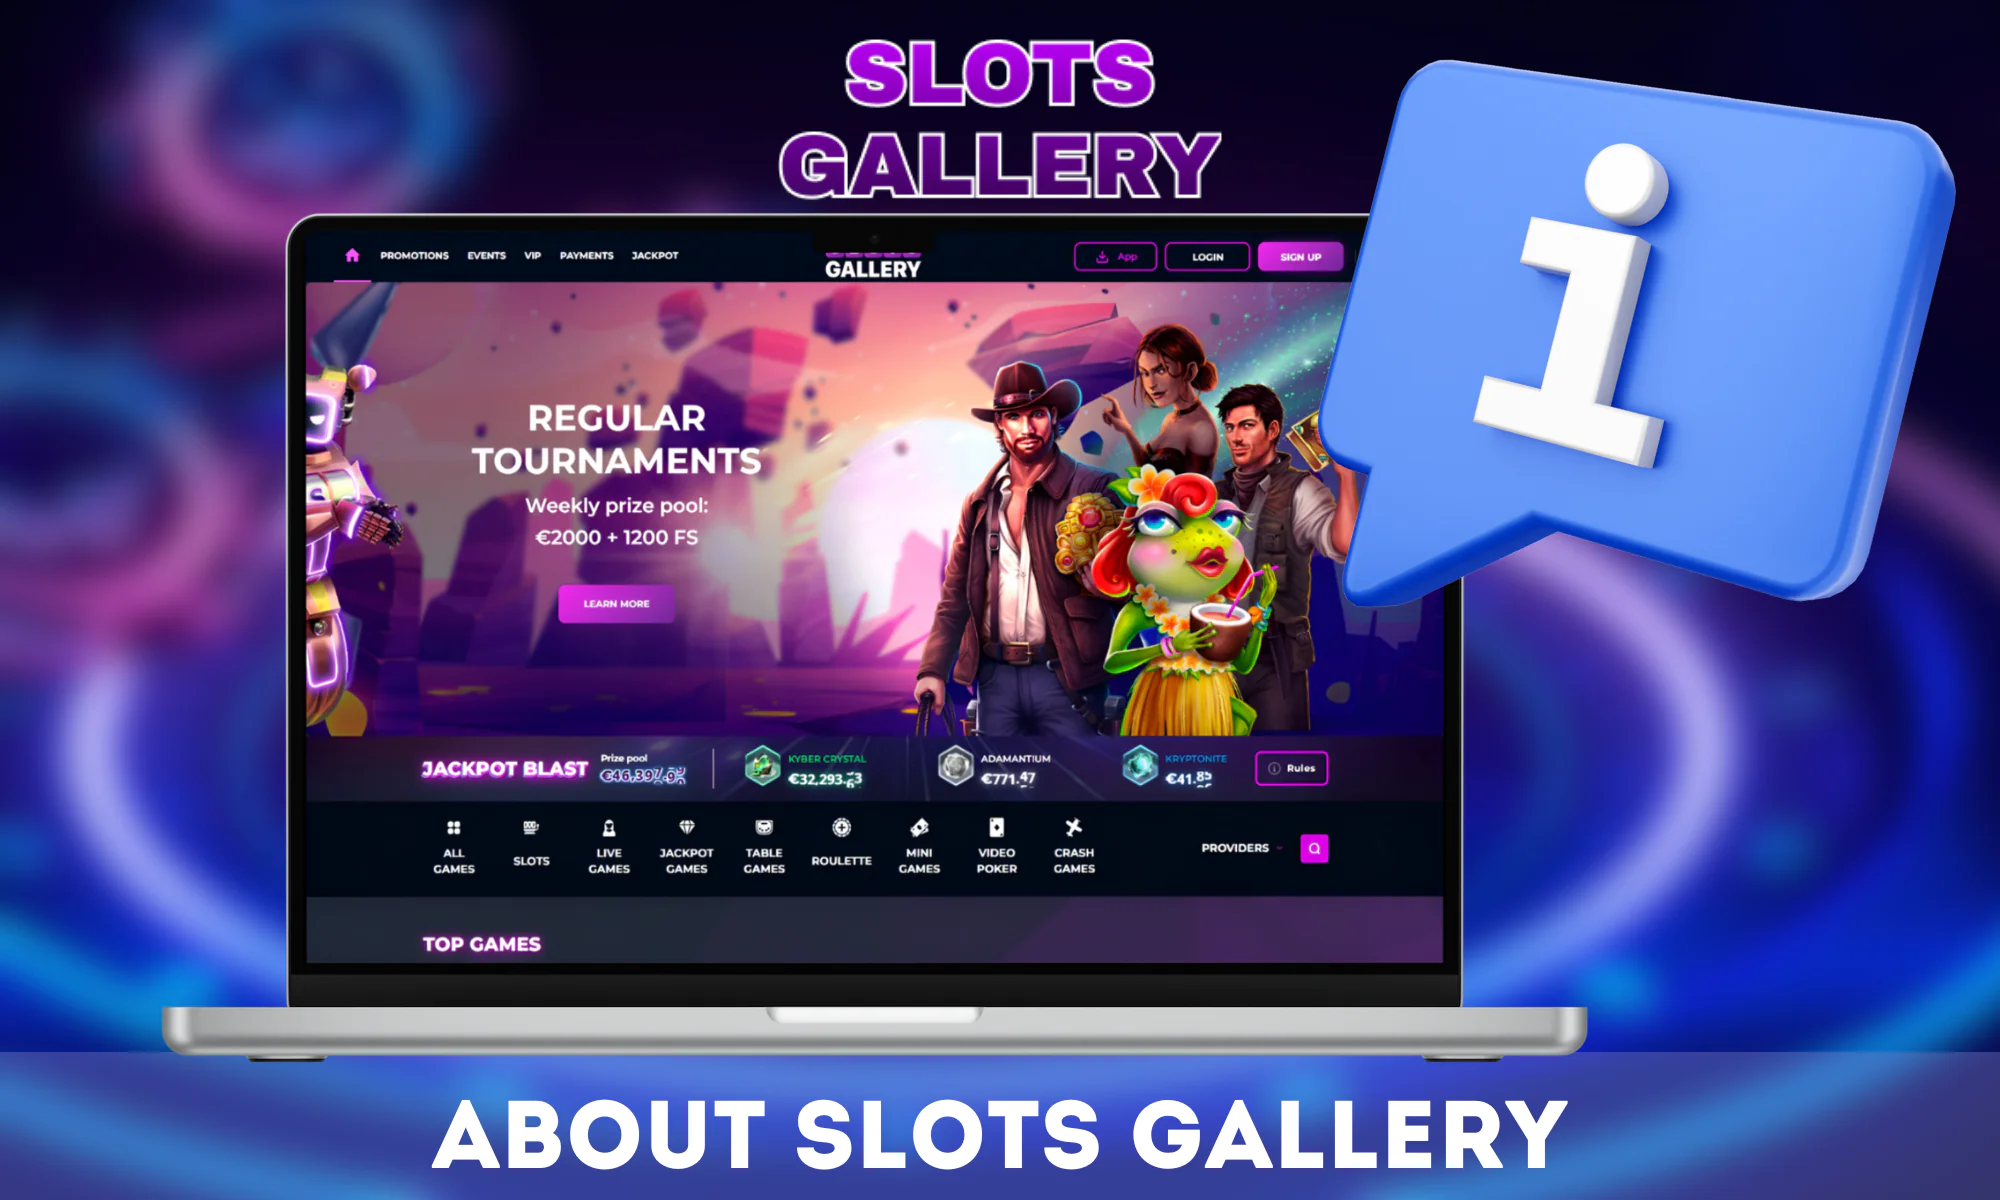 More information about Slots Gallery online casino